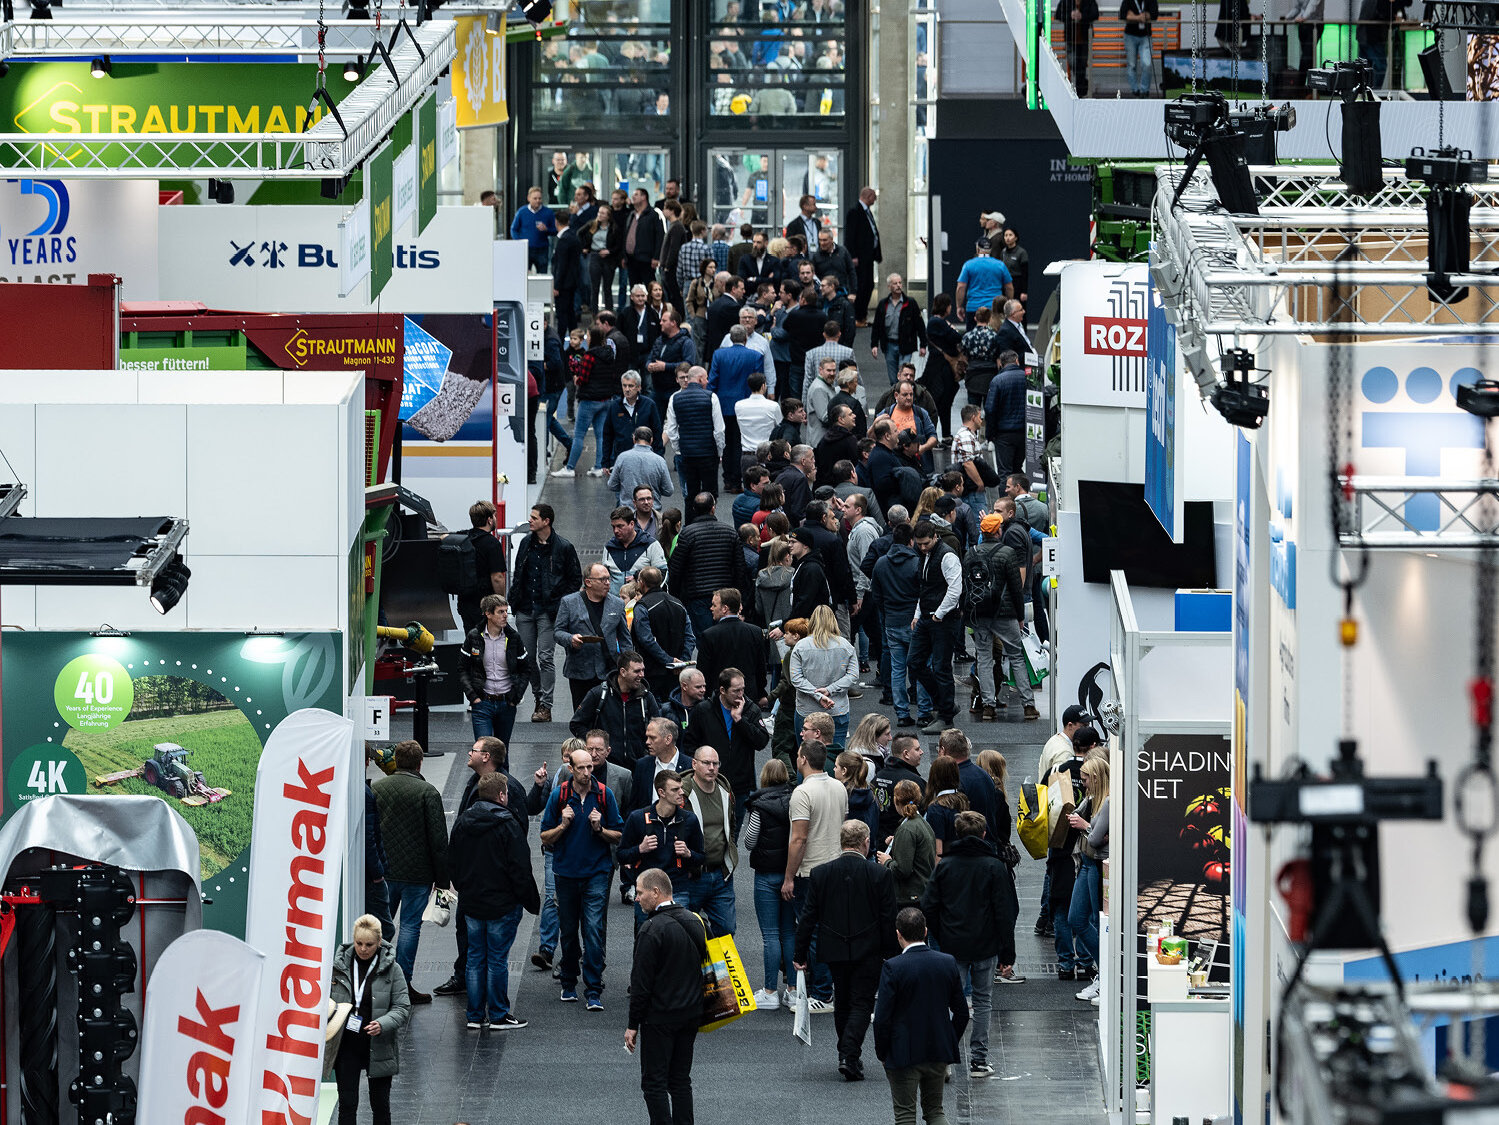 An aerial view image of a crowded agricultural machinery exhibition hall filled with visitors.